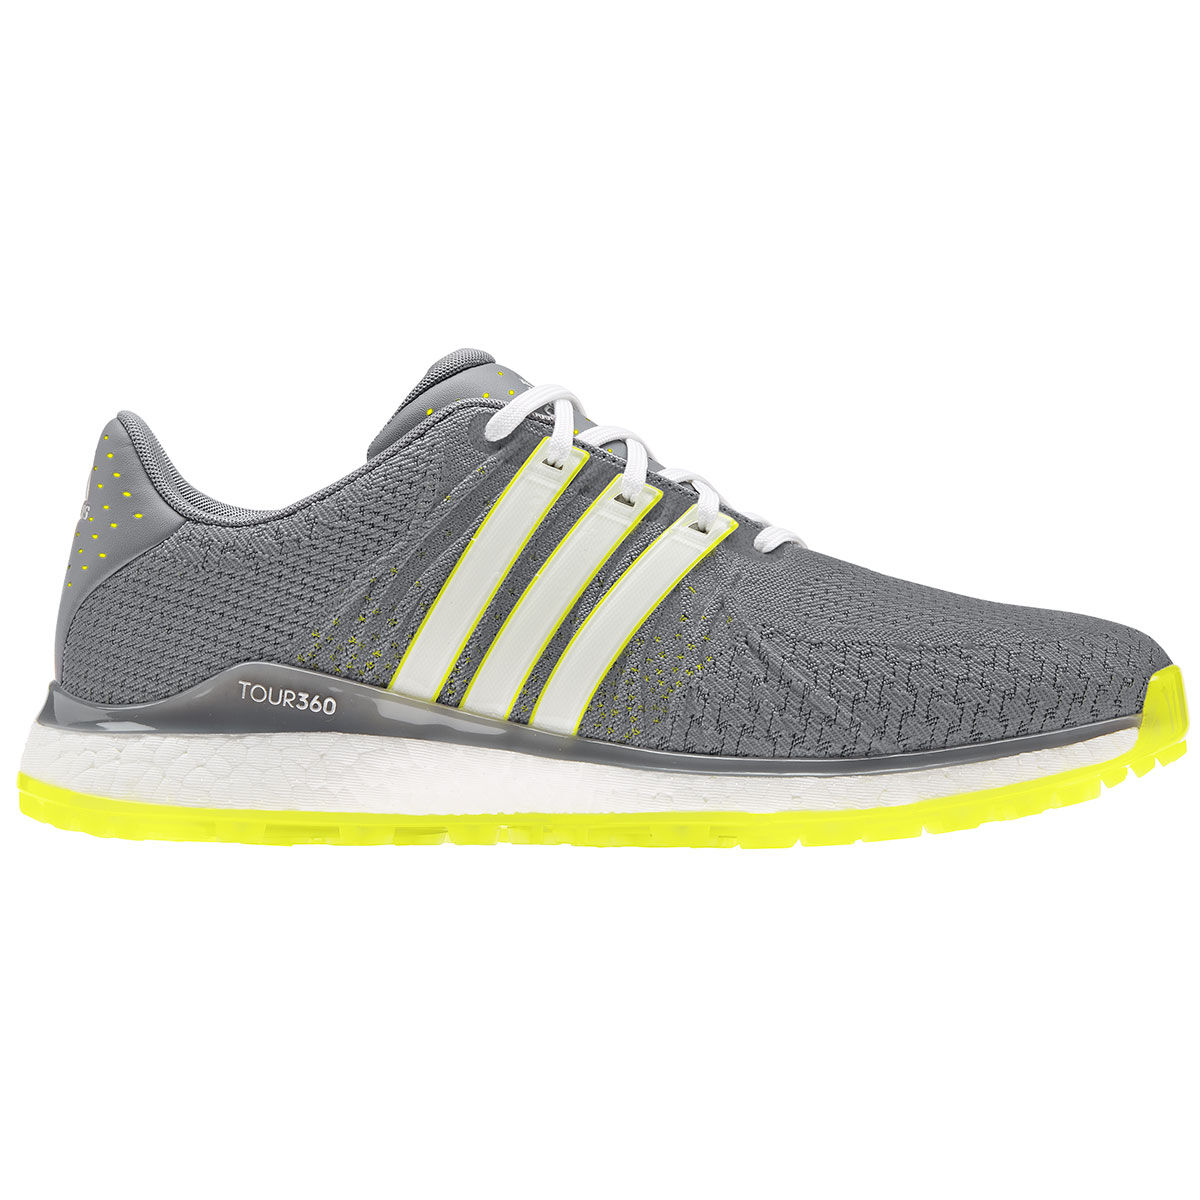 Chaussures adidas Golf Tour 360 XT-SL Textile, homme, 7, Grey/white/yellow, Normal | Online Golf